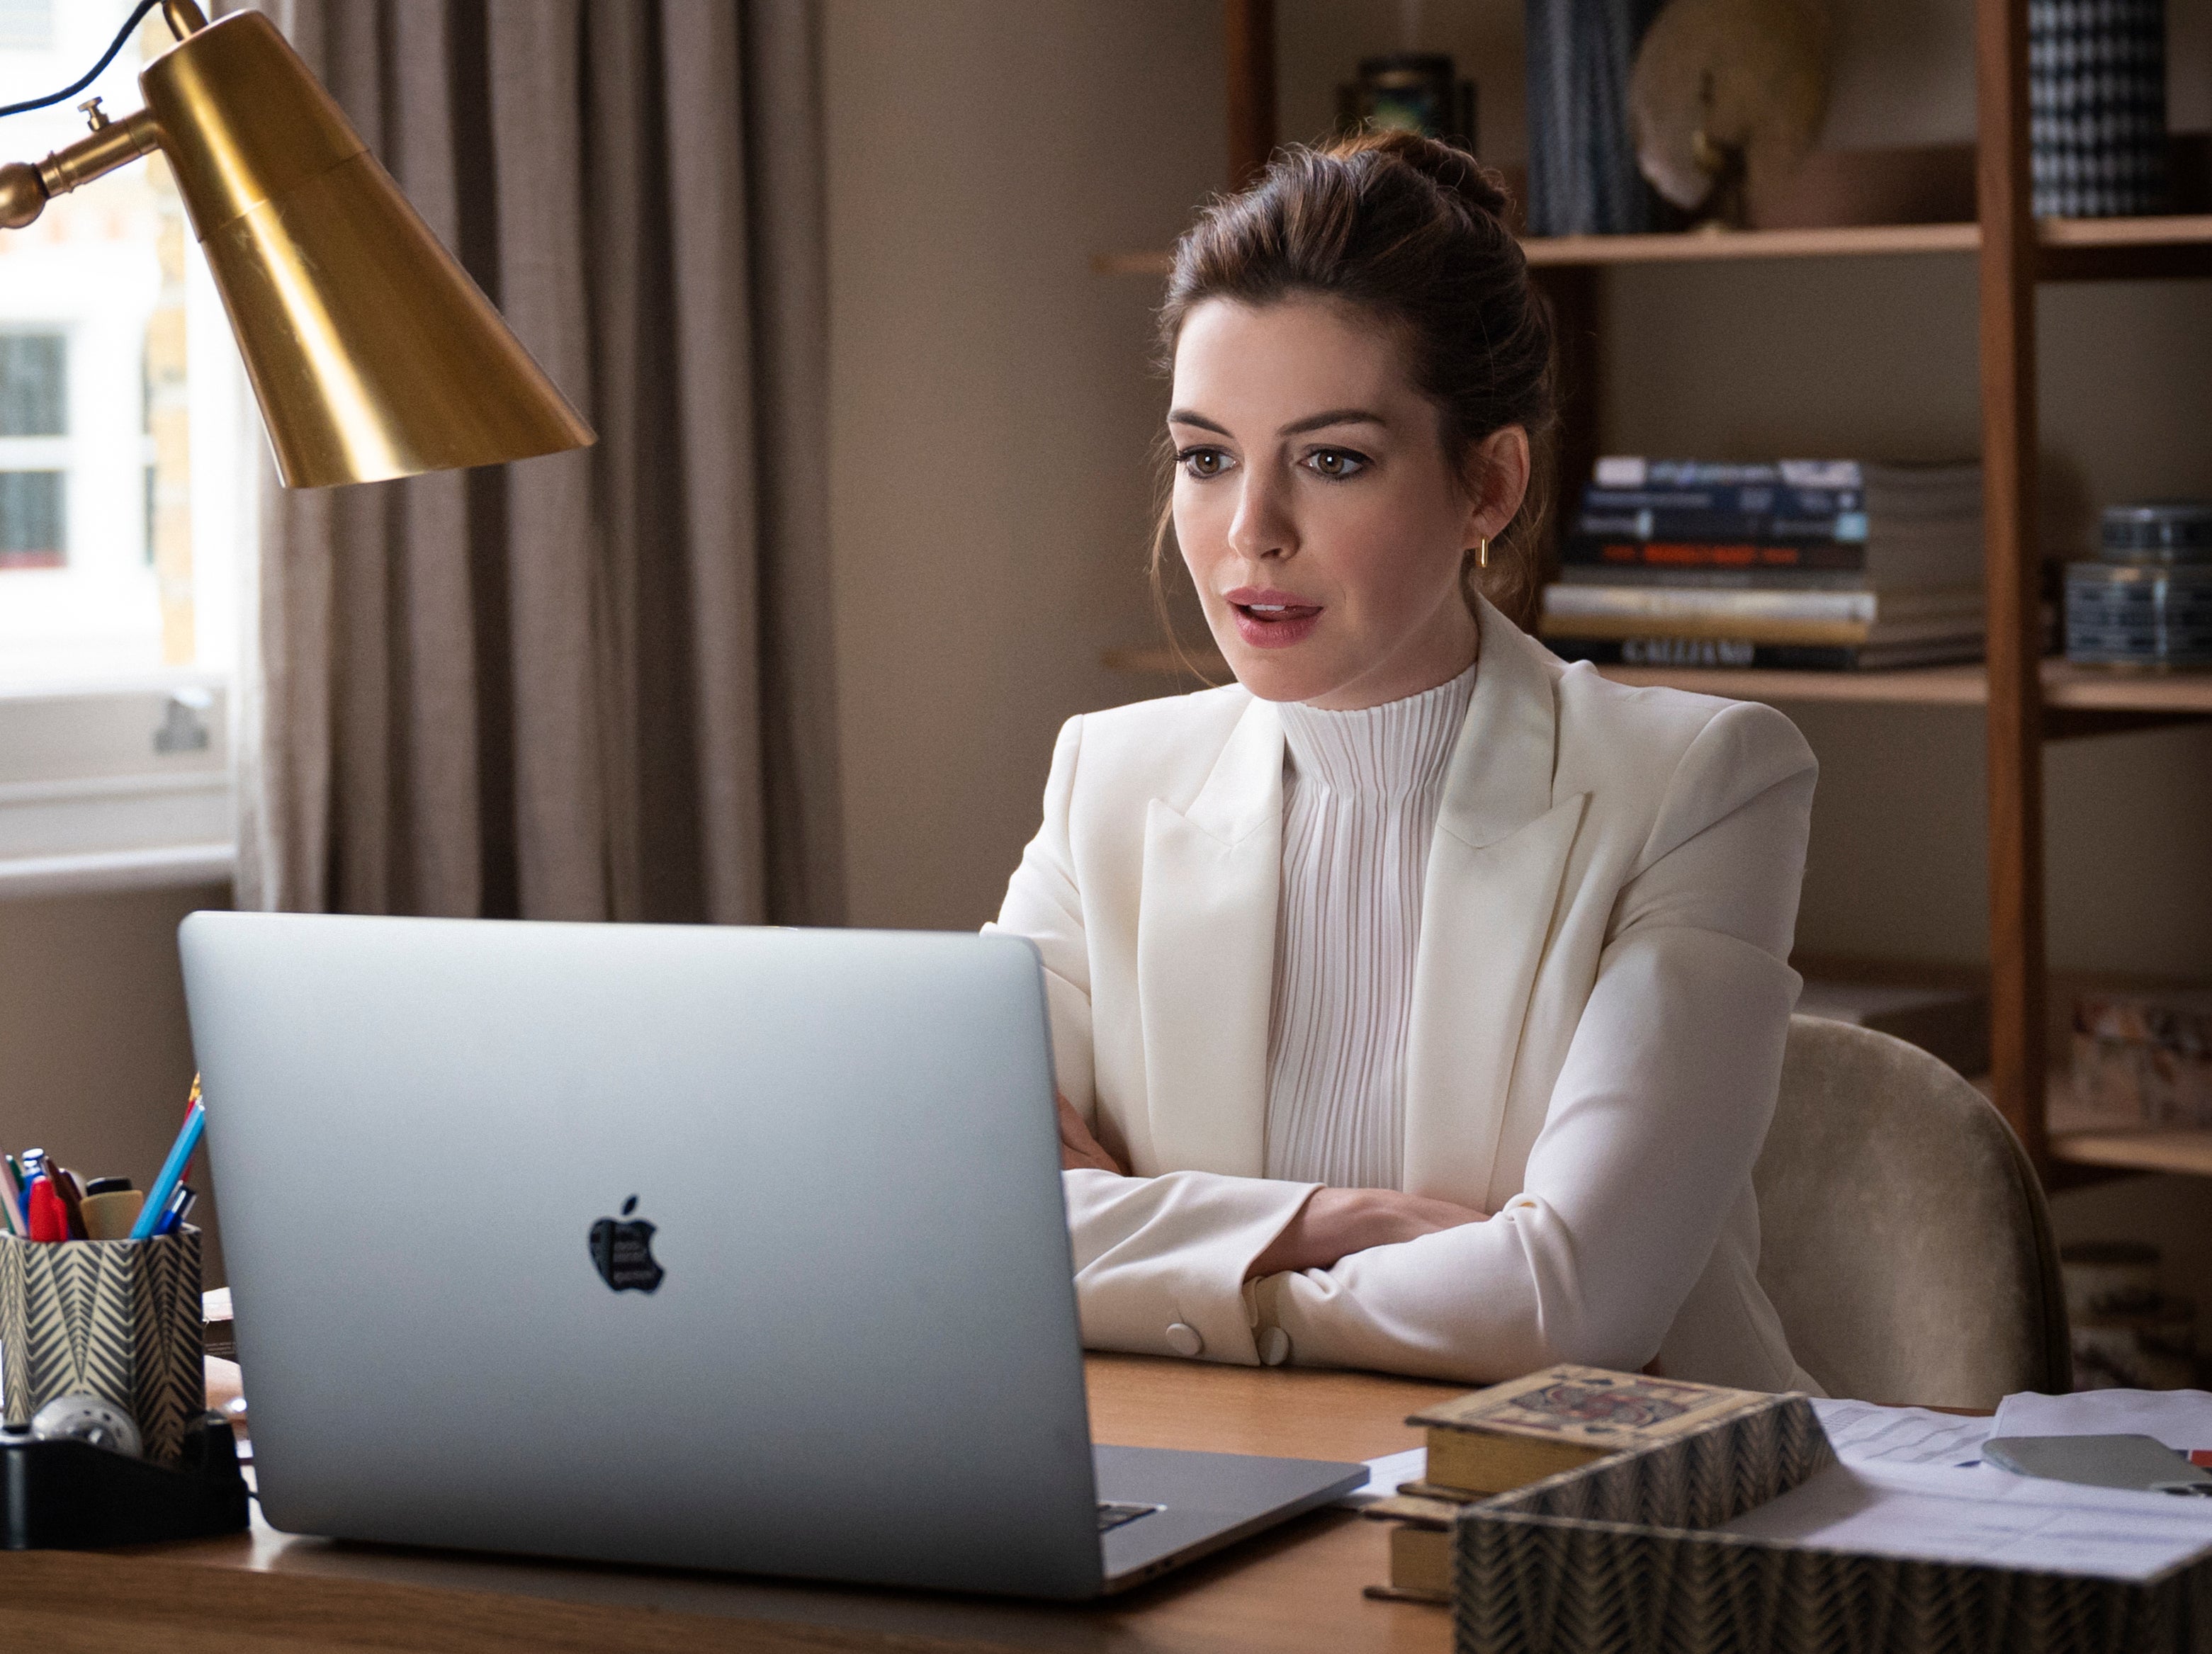 Anne Hathaway’s Linda is a strained executive for a high-fashion brand who has a moral awakening